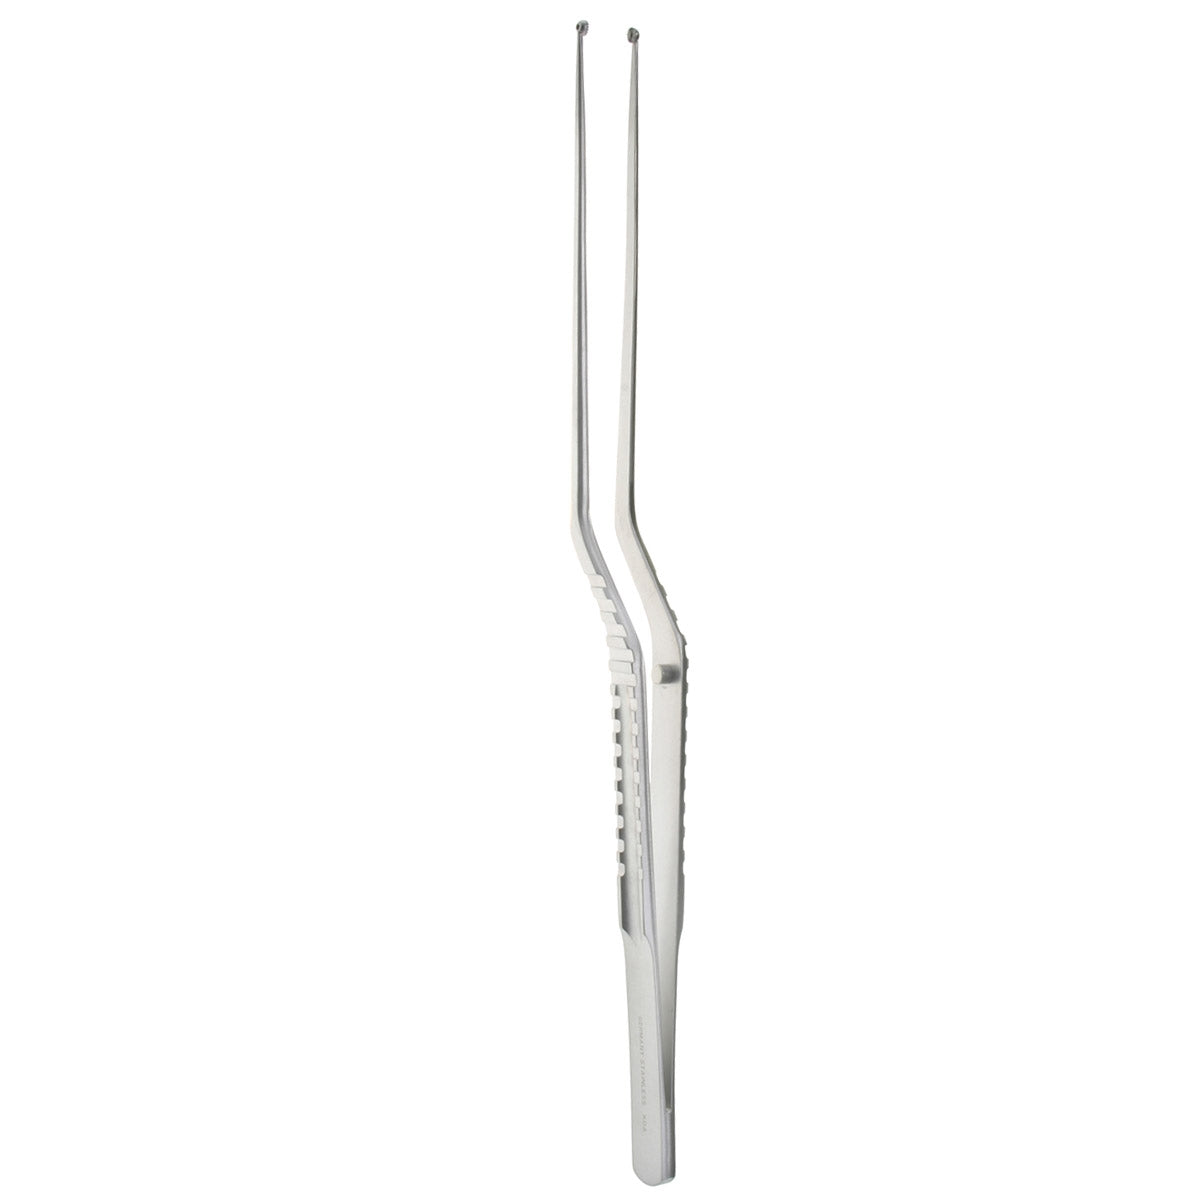 Yasargil Tumor Forceps  Cupped Serrated 5mm